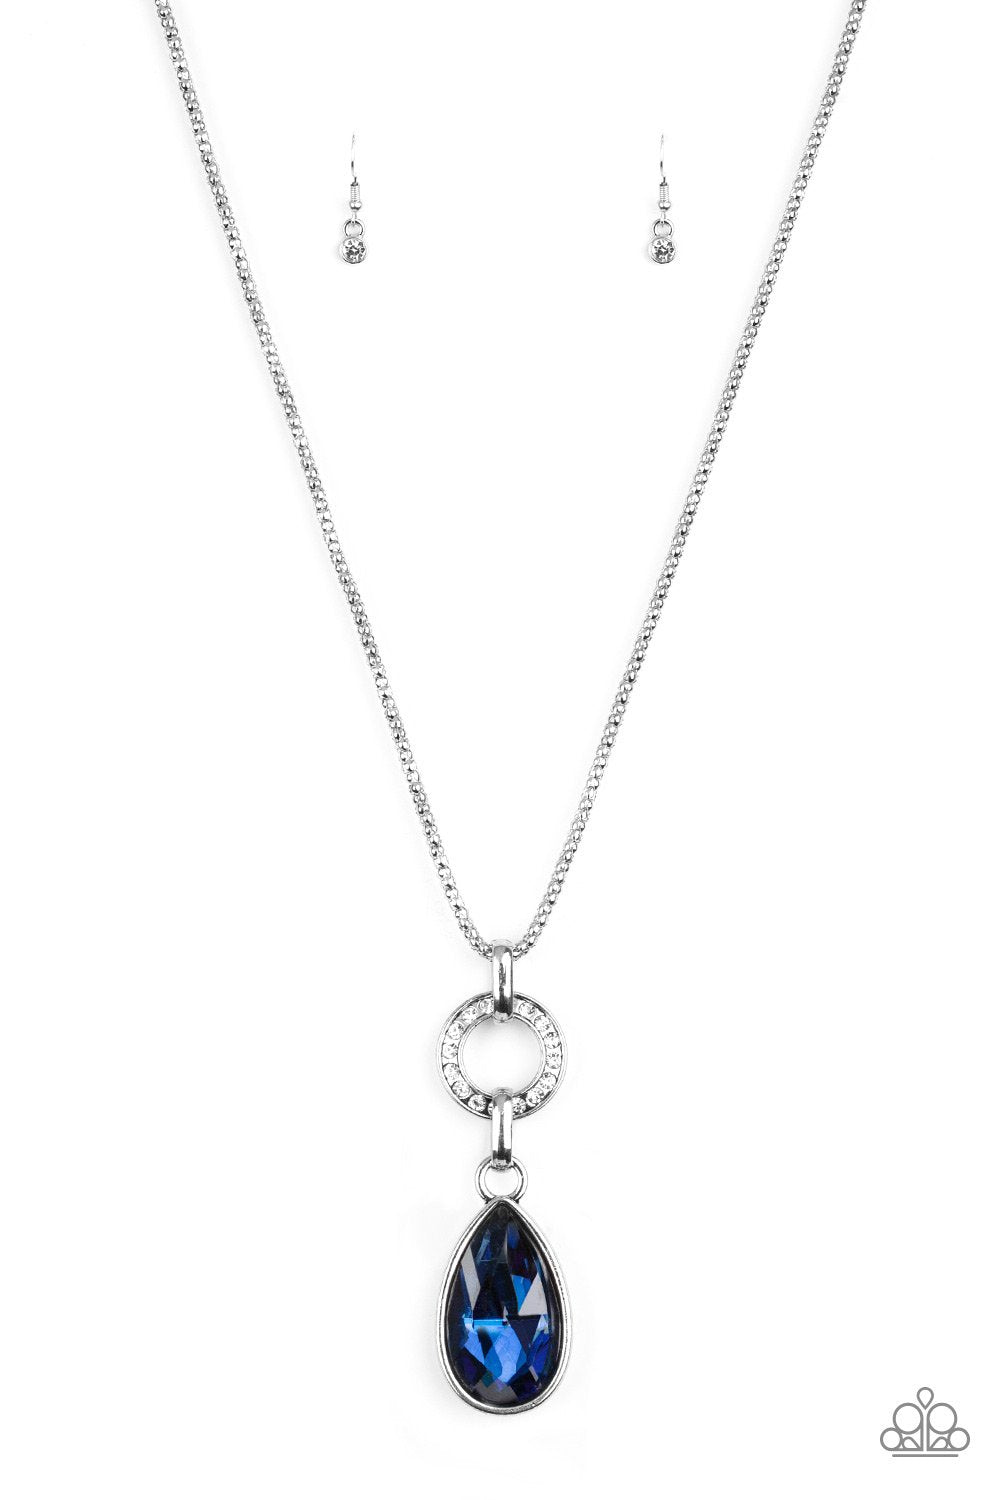 Lookin' Like a Million Sapphire Blue Teardrop Necklace and matching Earrings - Paparazzi Accessories-CarasShop.com - $5 Jewelry by Cara Jewels